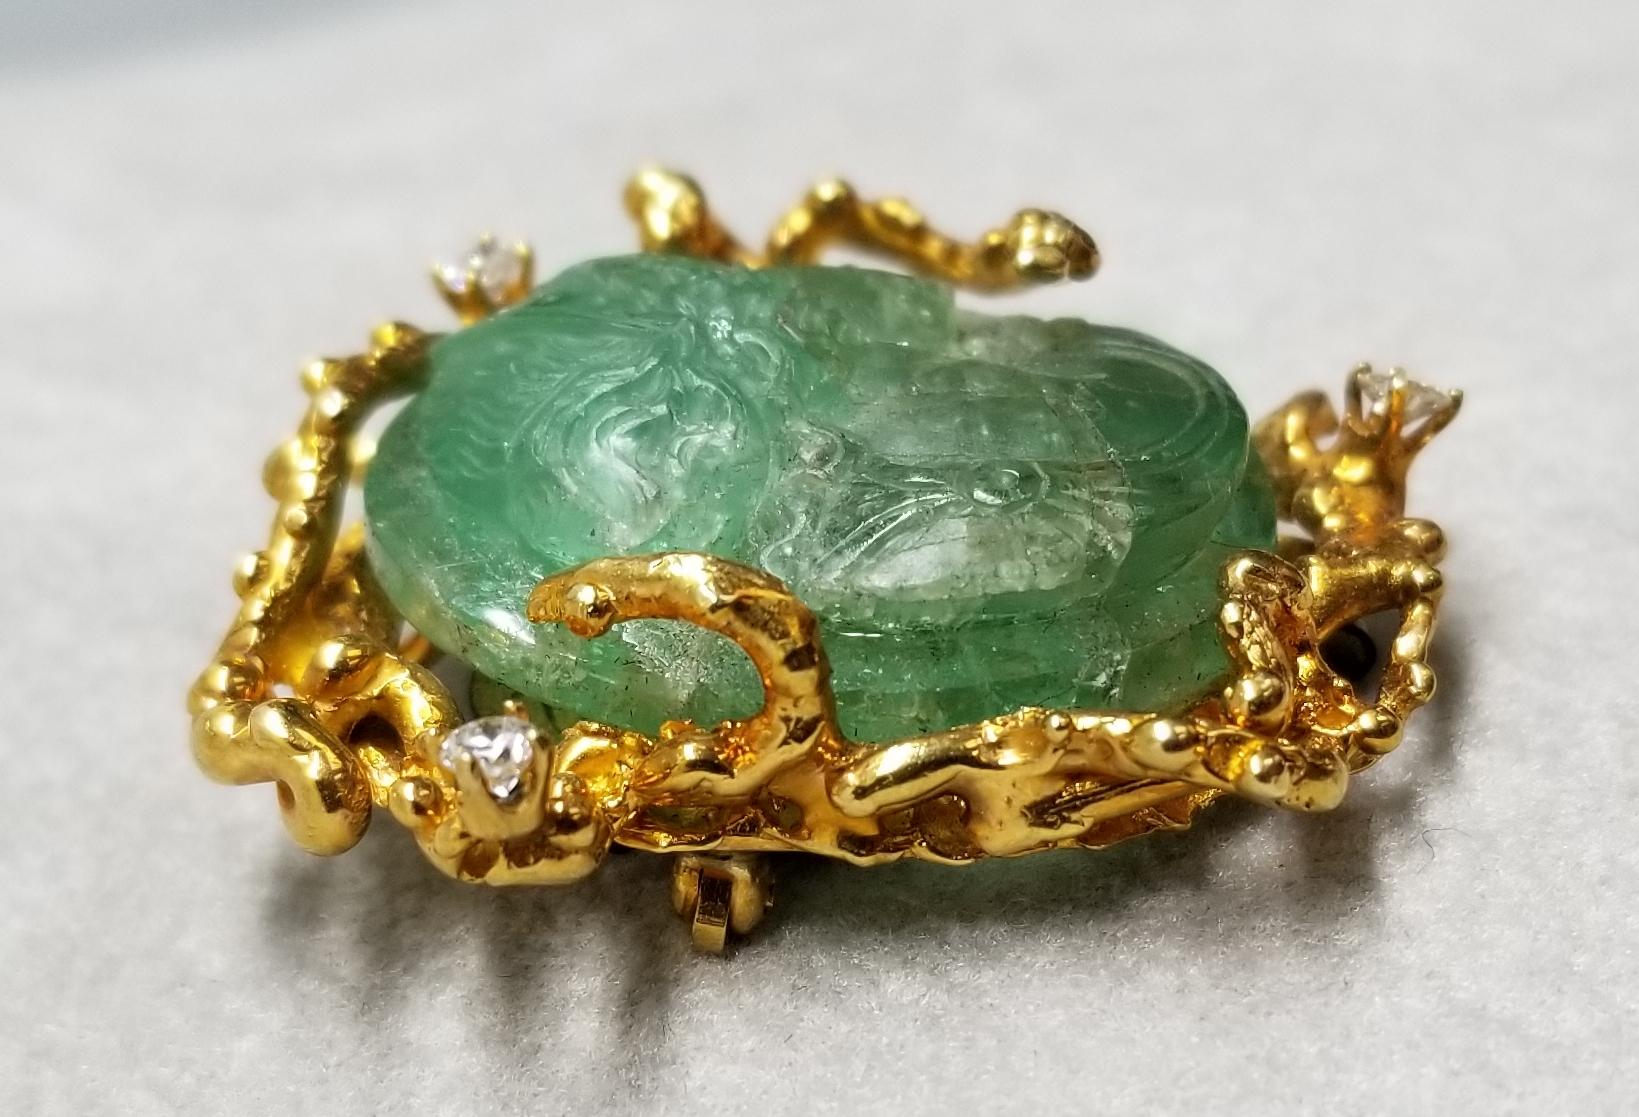 Contemporary 14 Karat Yellow Gold Pin/Pendant with a Hand Carved Emerald with Diamonds